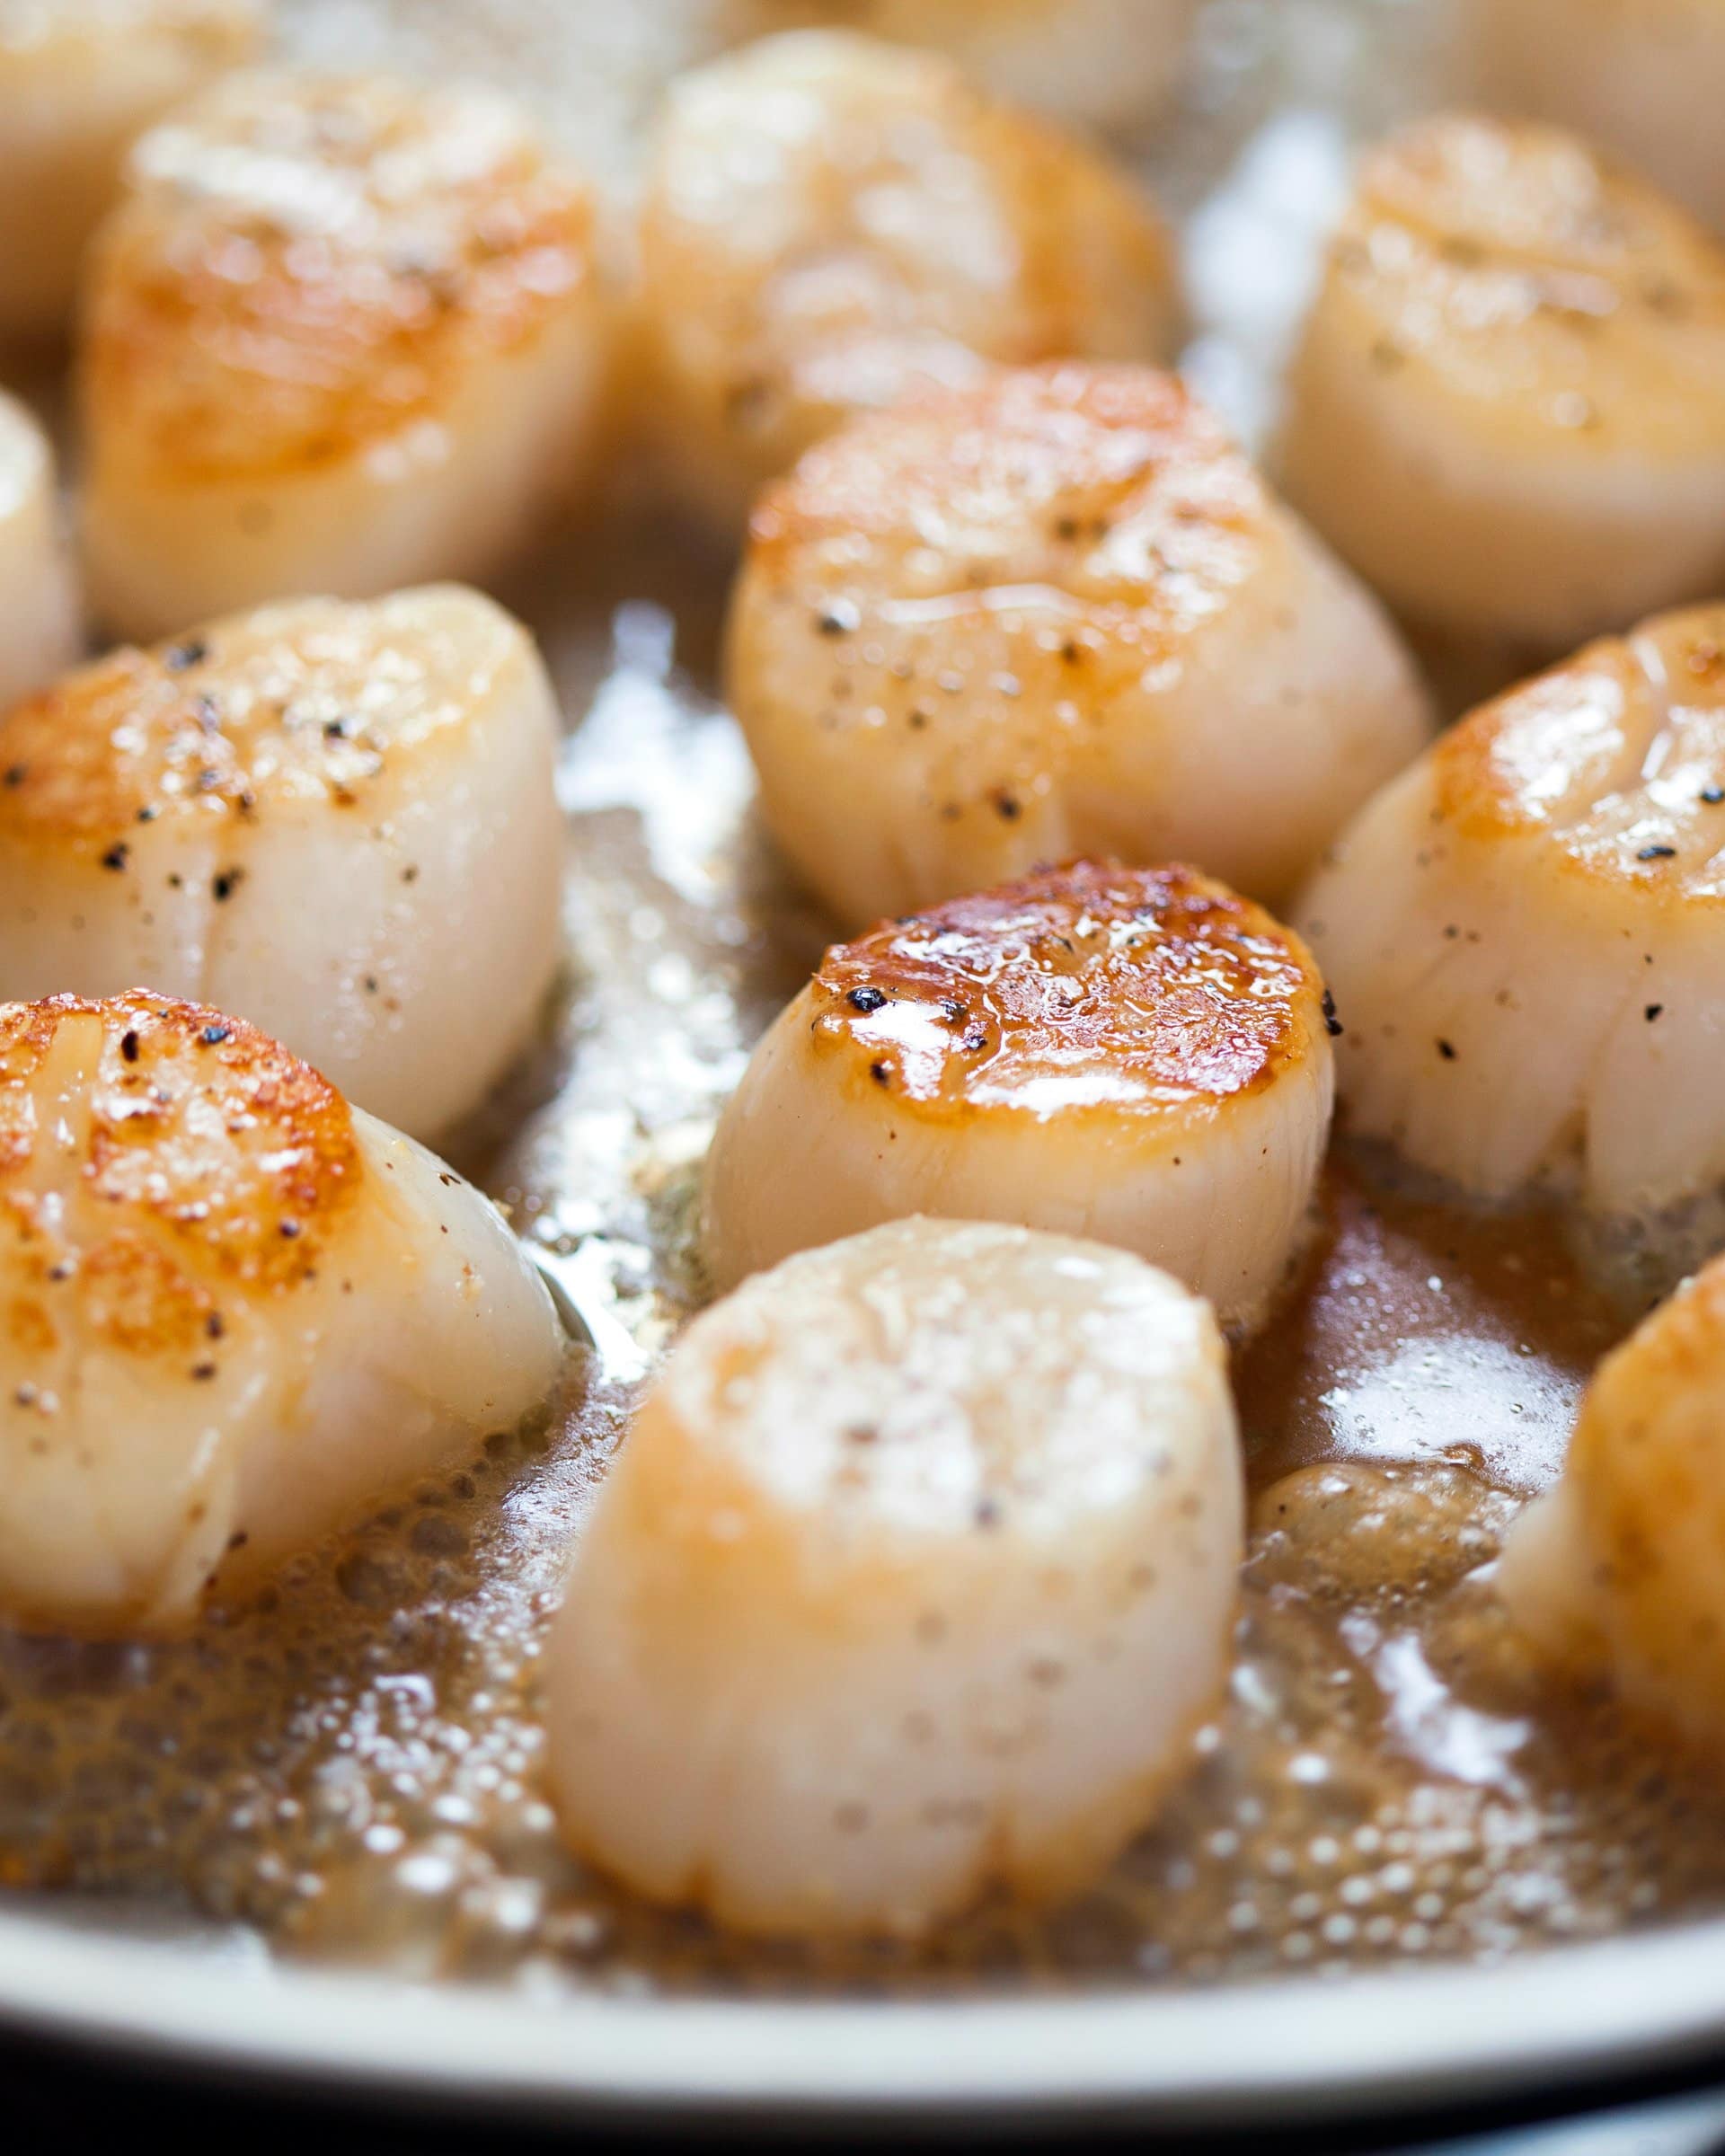 How To Cook Scallops On The St